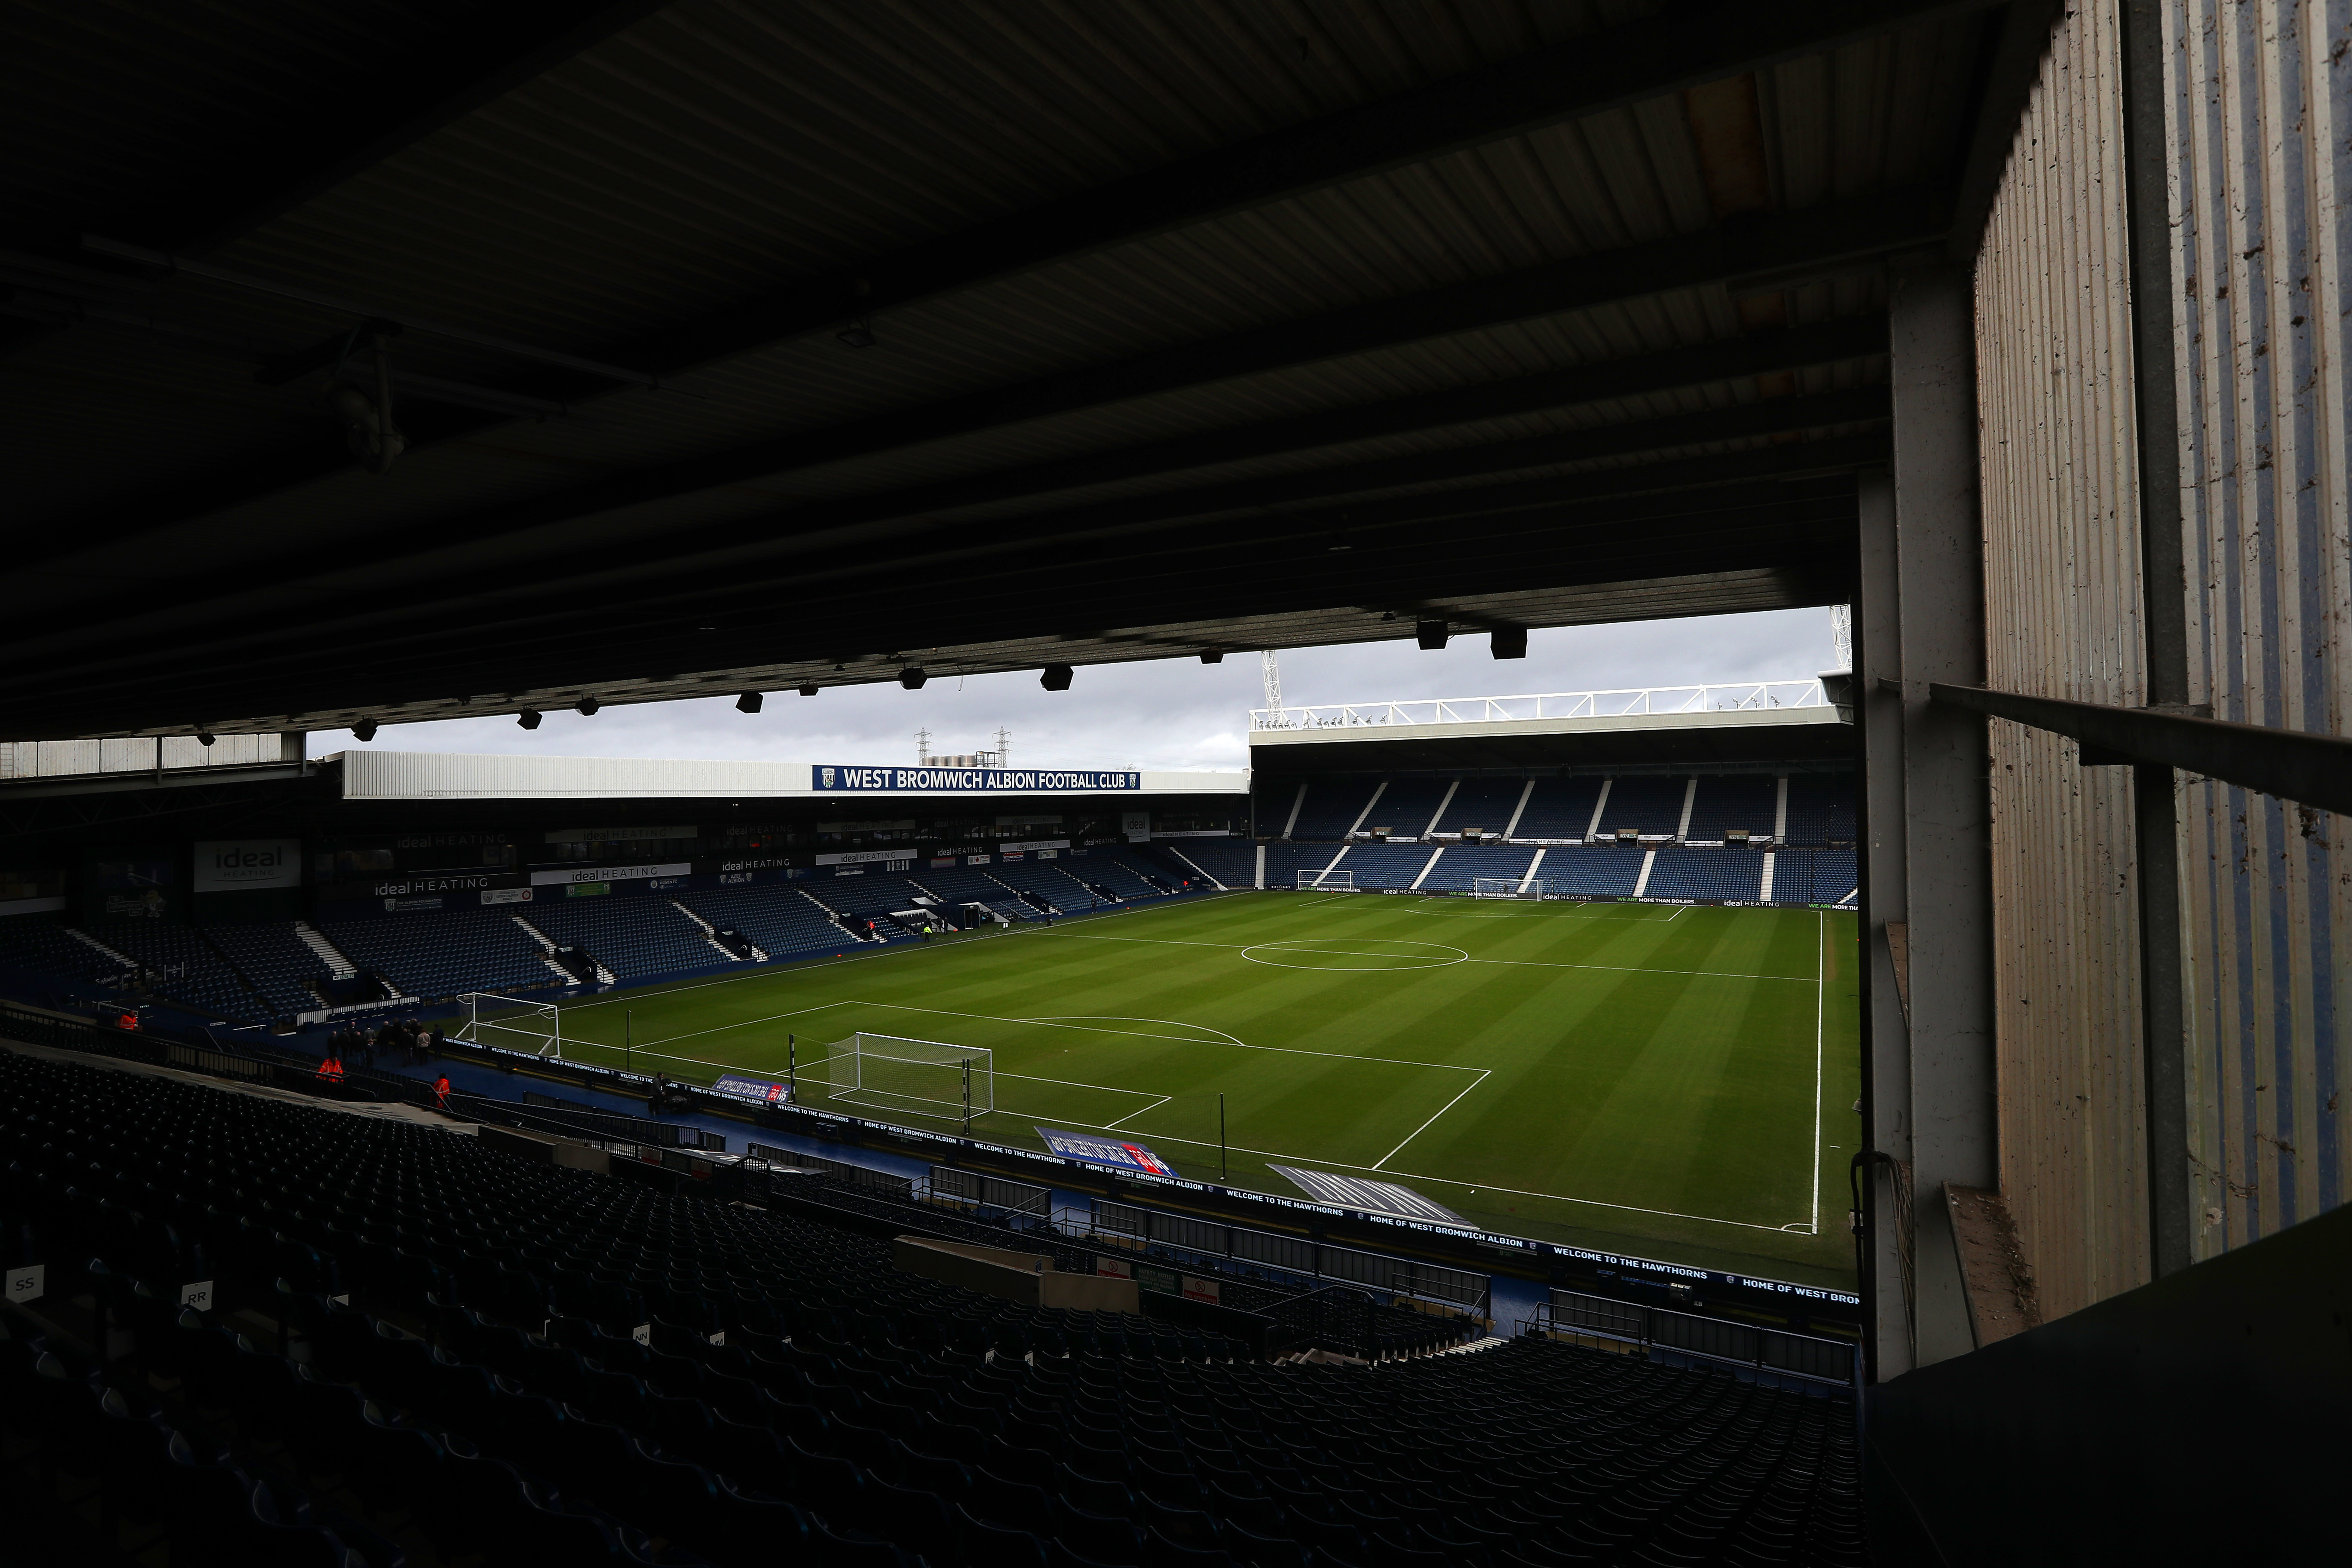 A general view of The Hawthorns with the photo taken from the back right corner of the Smethwick End stand